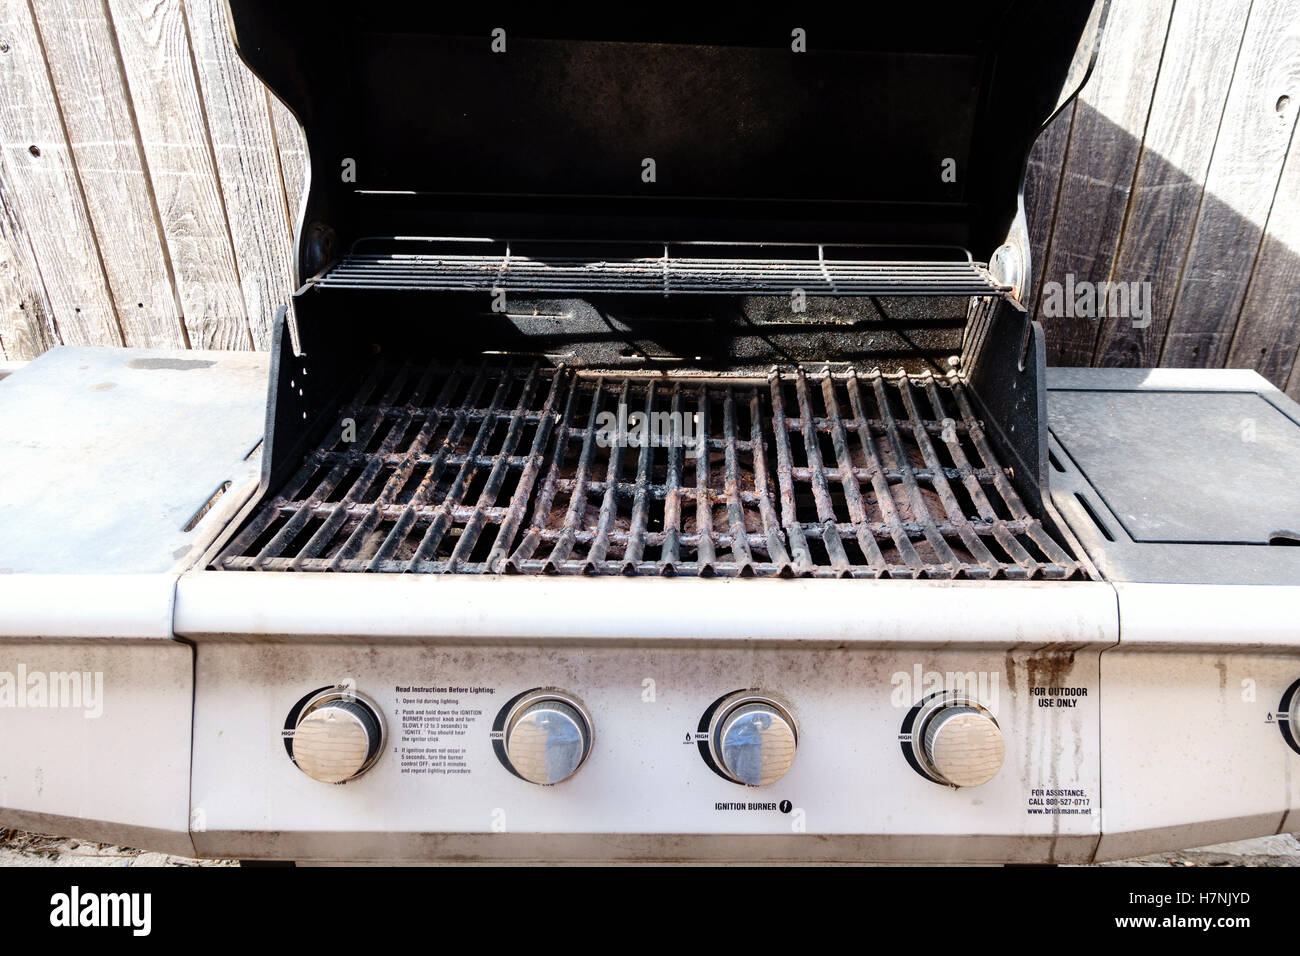 A  propane gas grill with lid open showing rust and a deteriorating condition. USA. Stock Photo